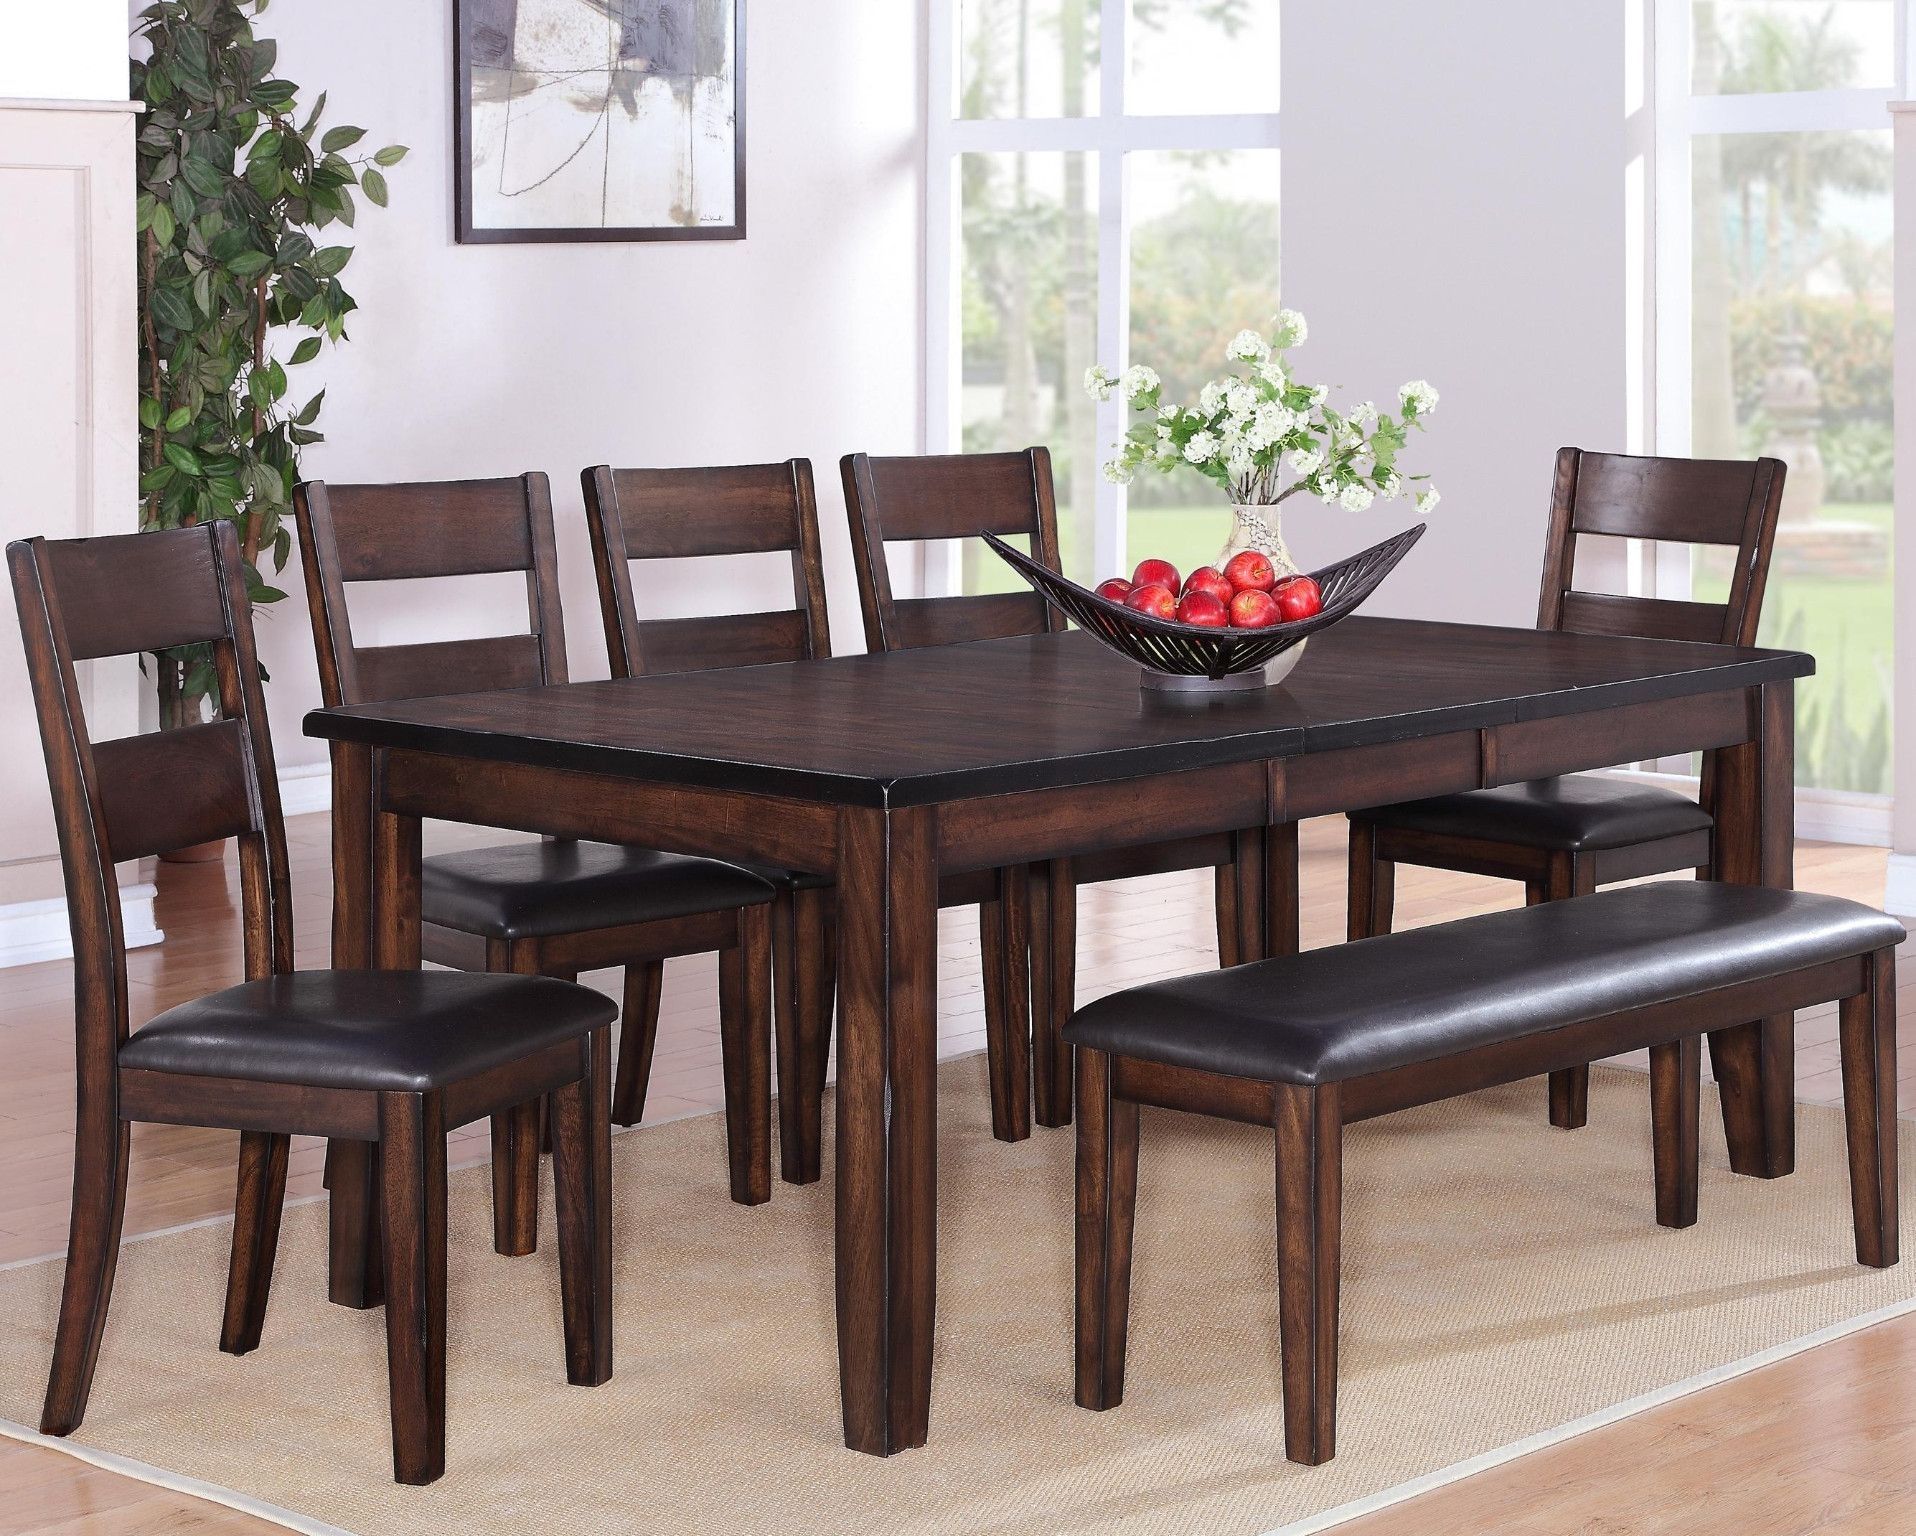 Maldives 5 Piece Dinette Table And 4 Chairs $699.00 Table $459.00 42 With Regard To Latest Craftsman 7 Piece Rectangular Extension Dining Sets With Arm &amp; Uph Side Chairs (Photo 4 of 20)